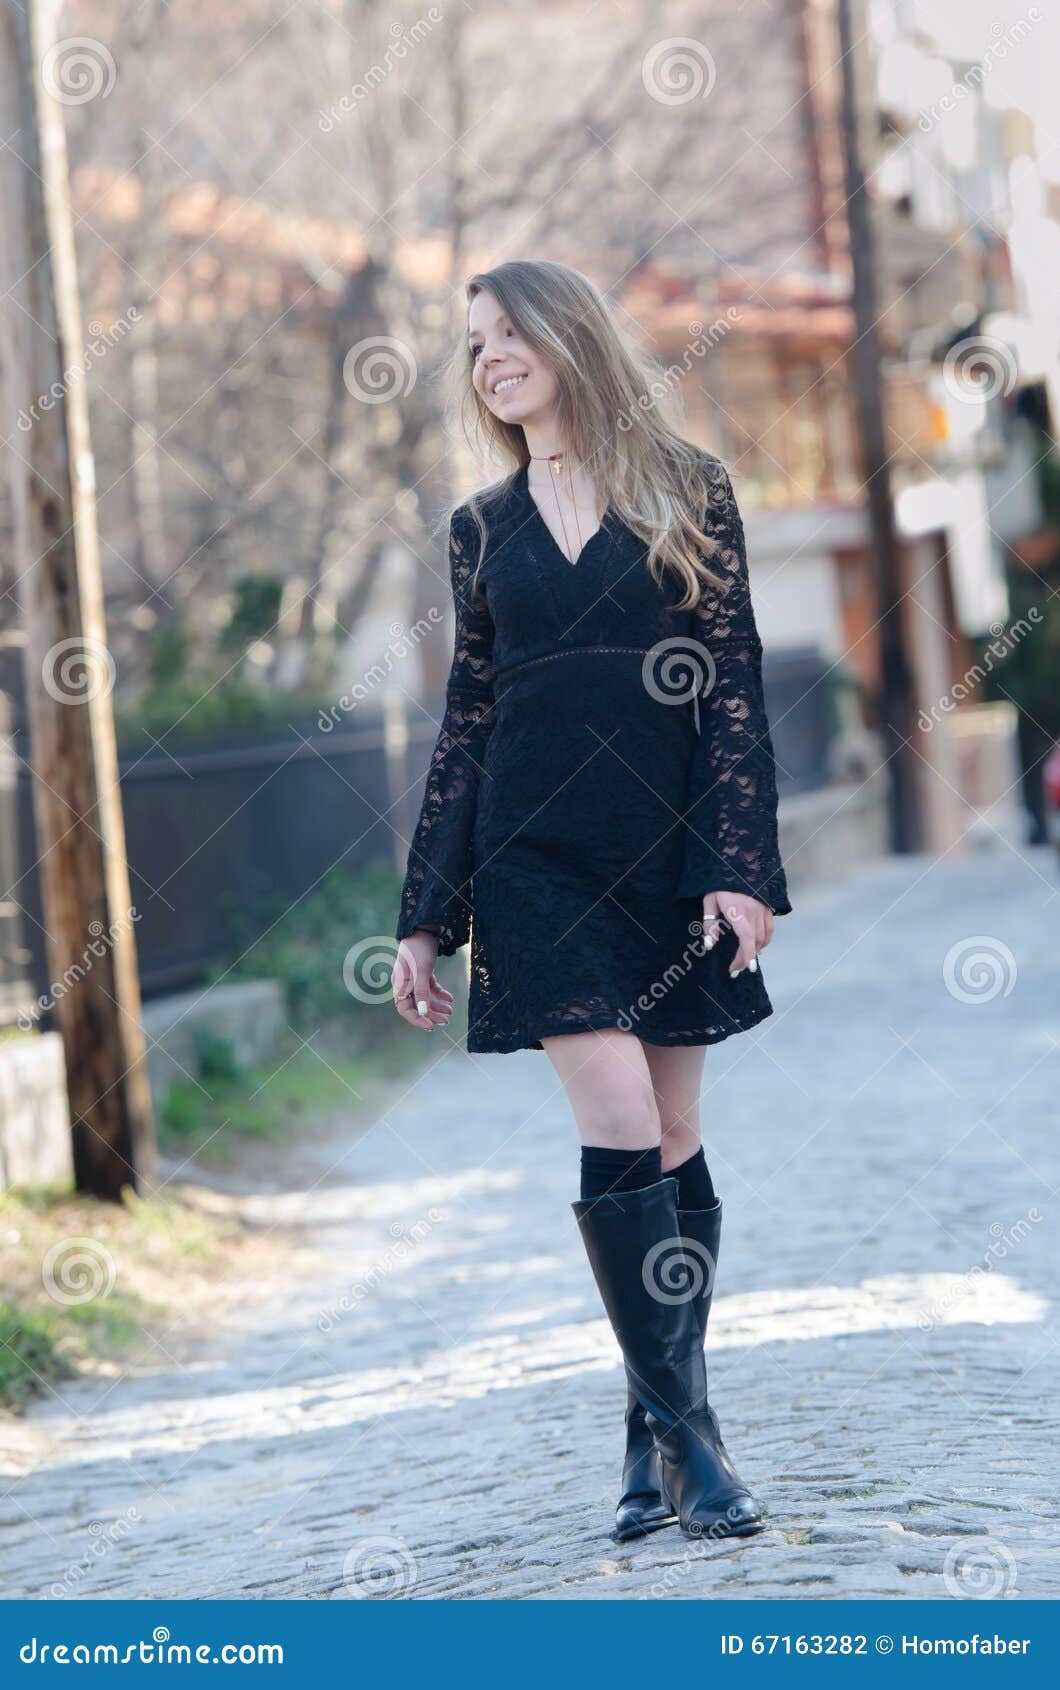 Bronde Lady Walking Outside in the Town Stock Photo - Image of ...